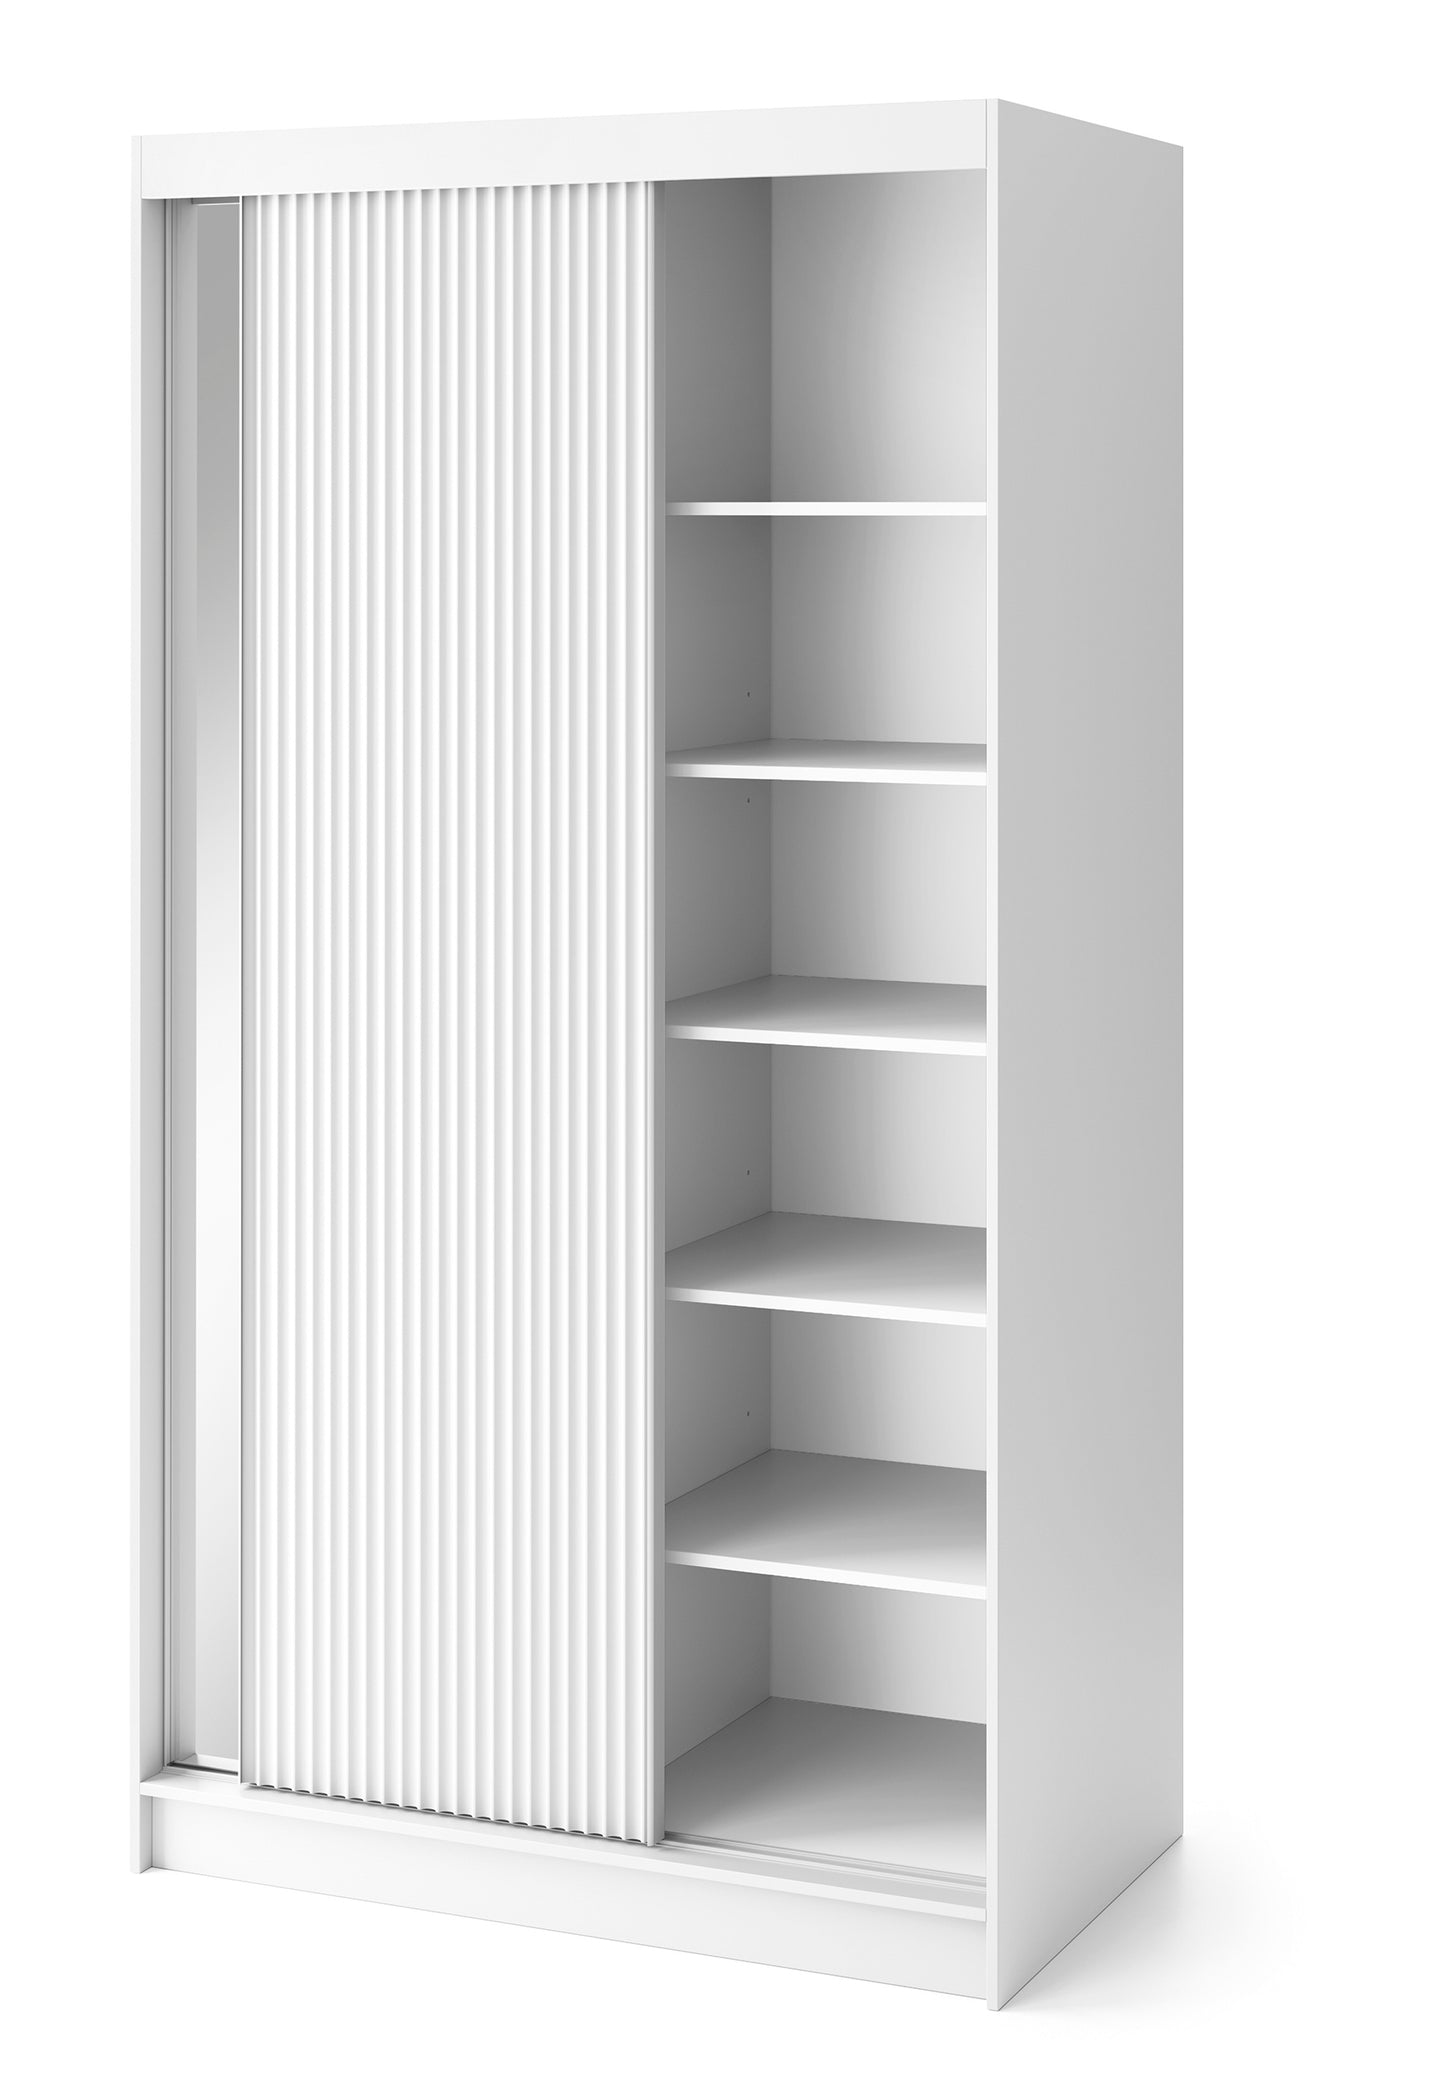 Biancco II with Mirror - Two Sliding Doors Wardrobe White with Hanging Rail, Shelves  >120cm<